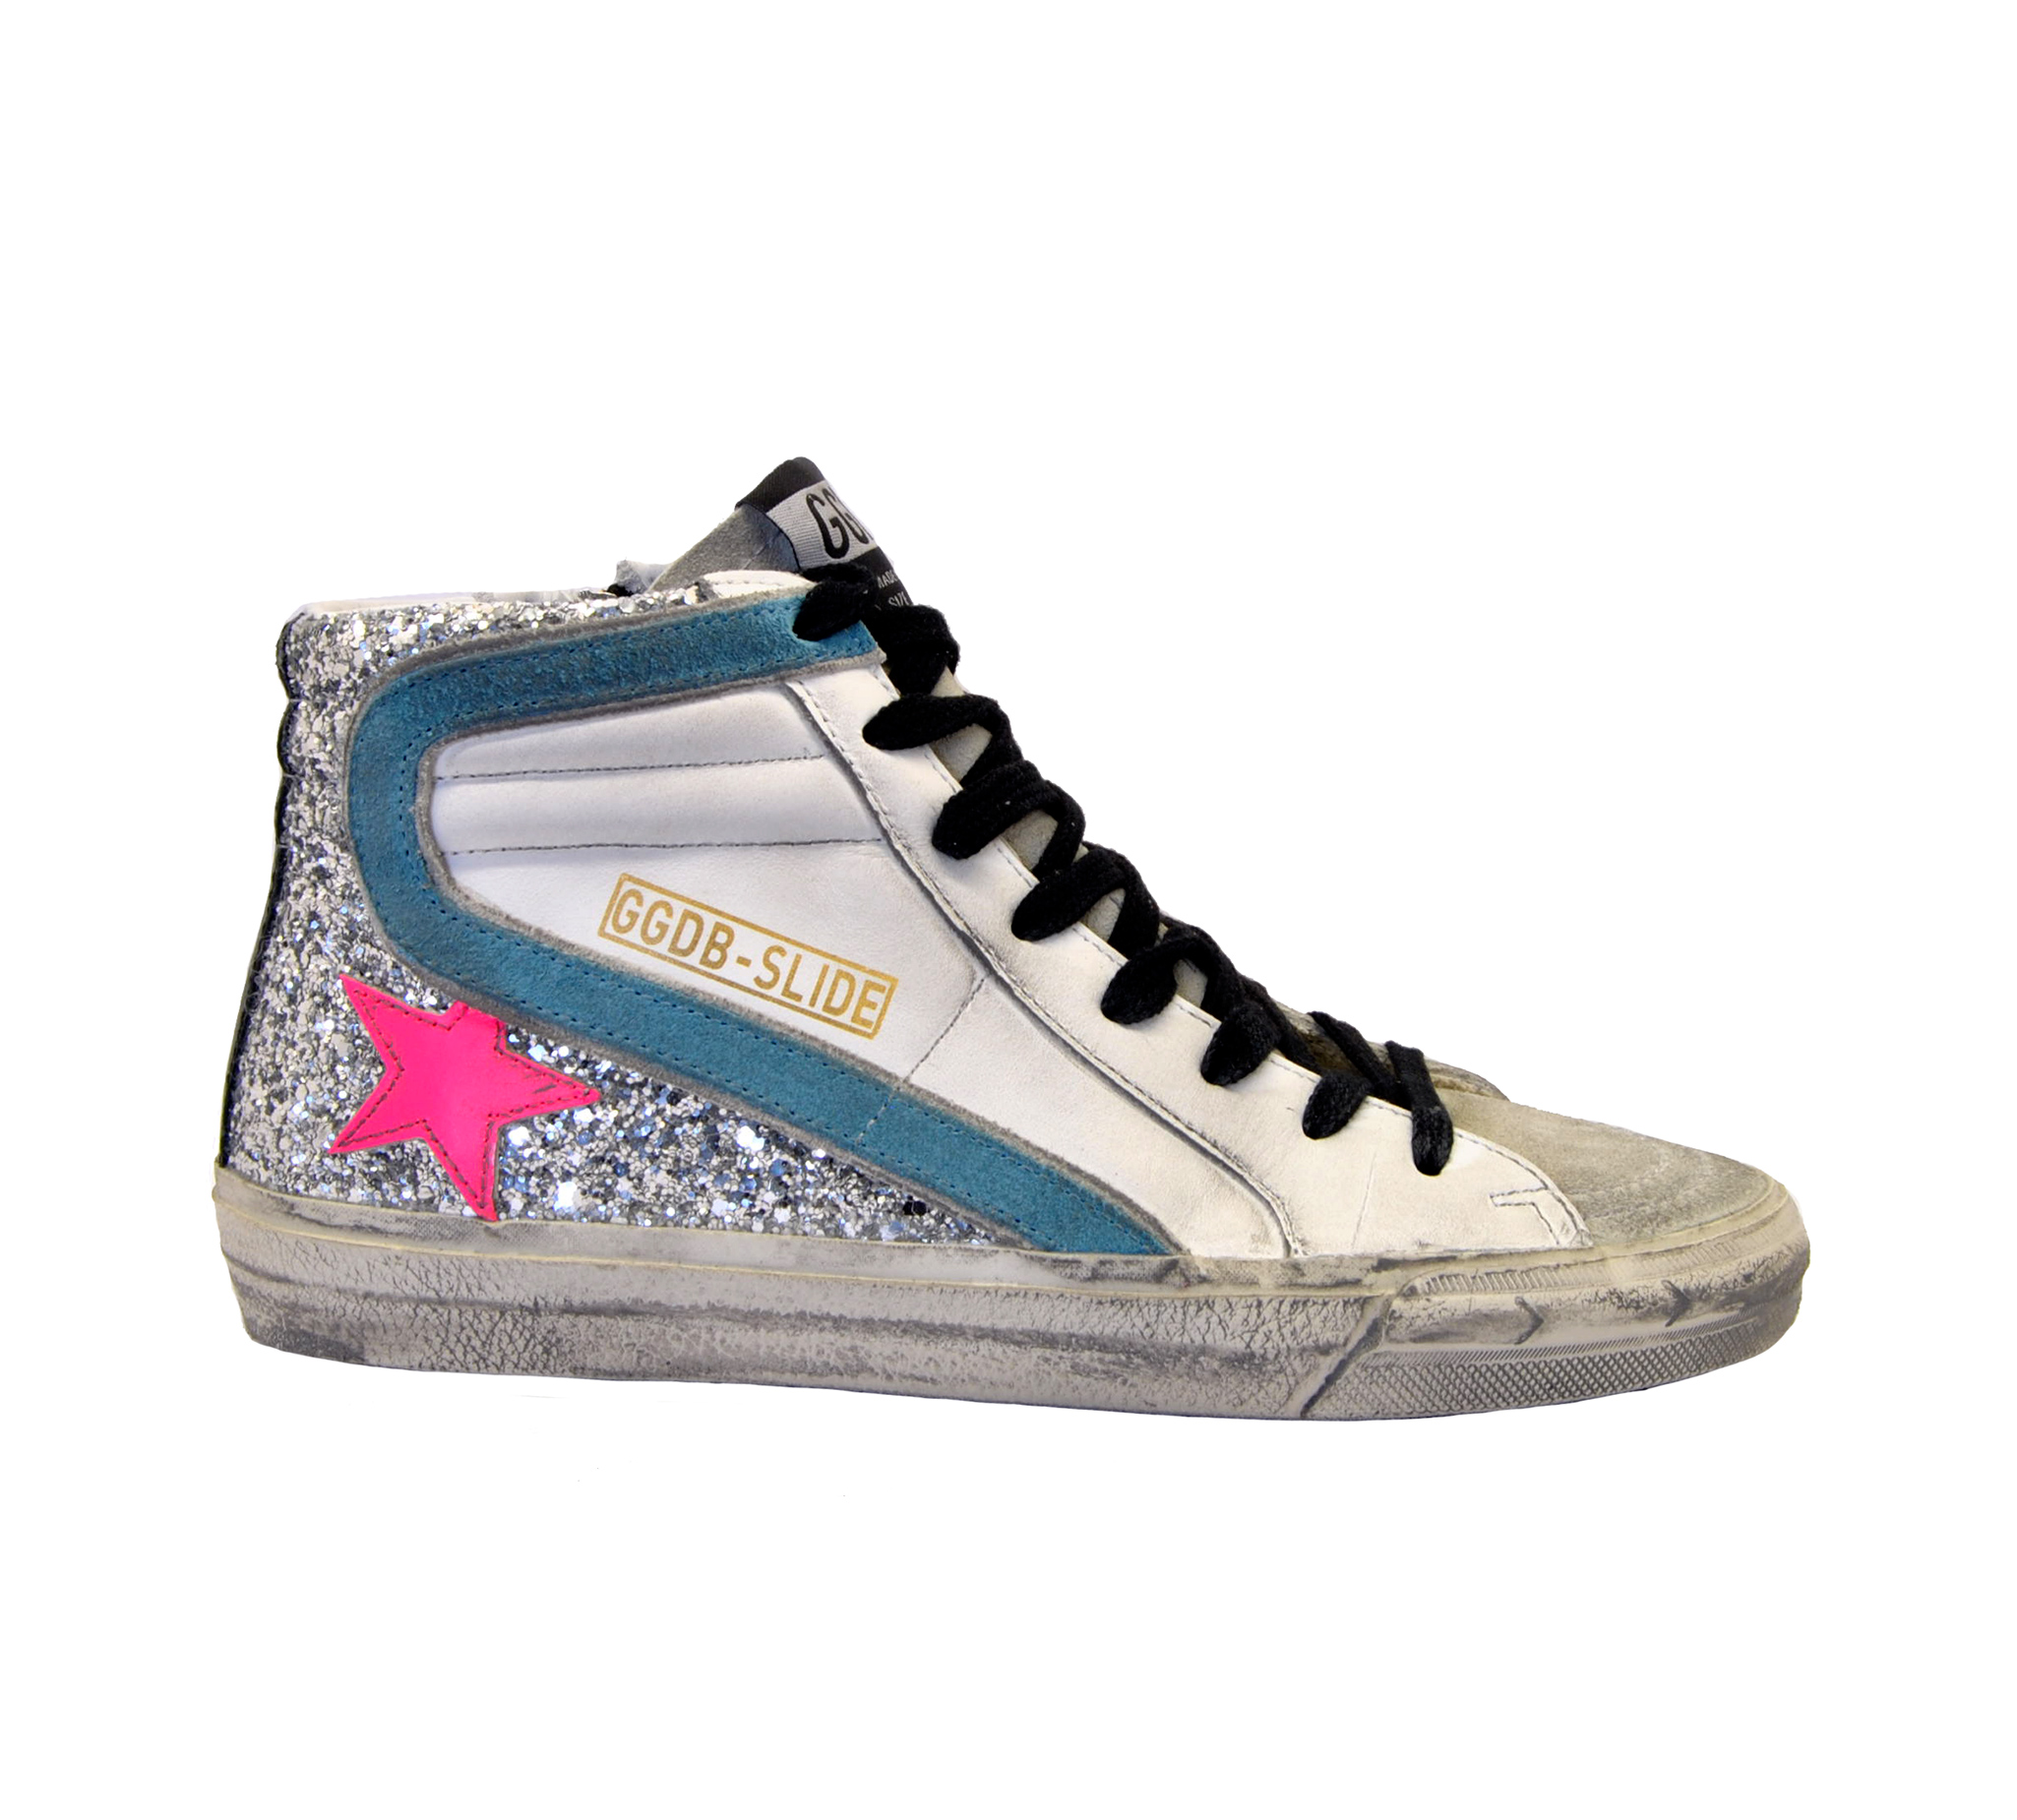 Golden goose - Sneakers slide bianco glitter argento - Mary Claud